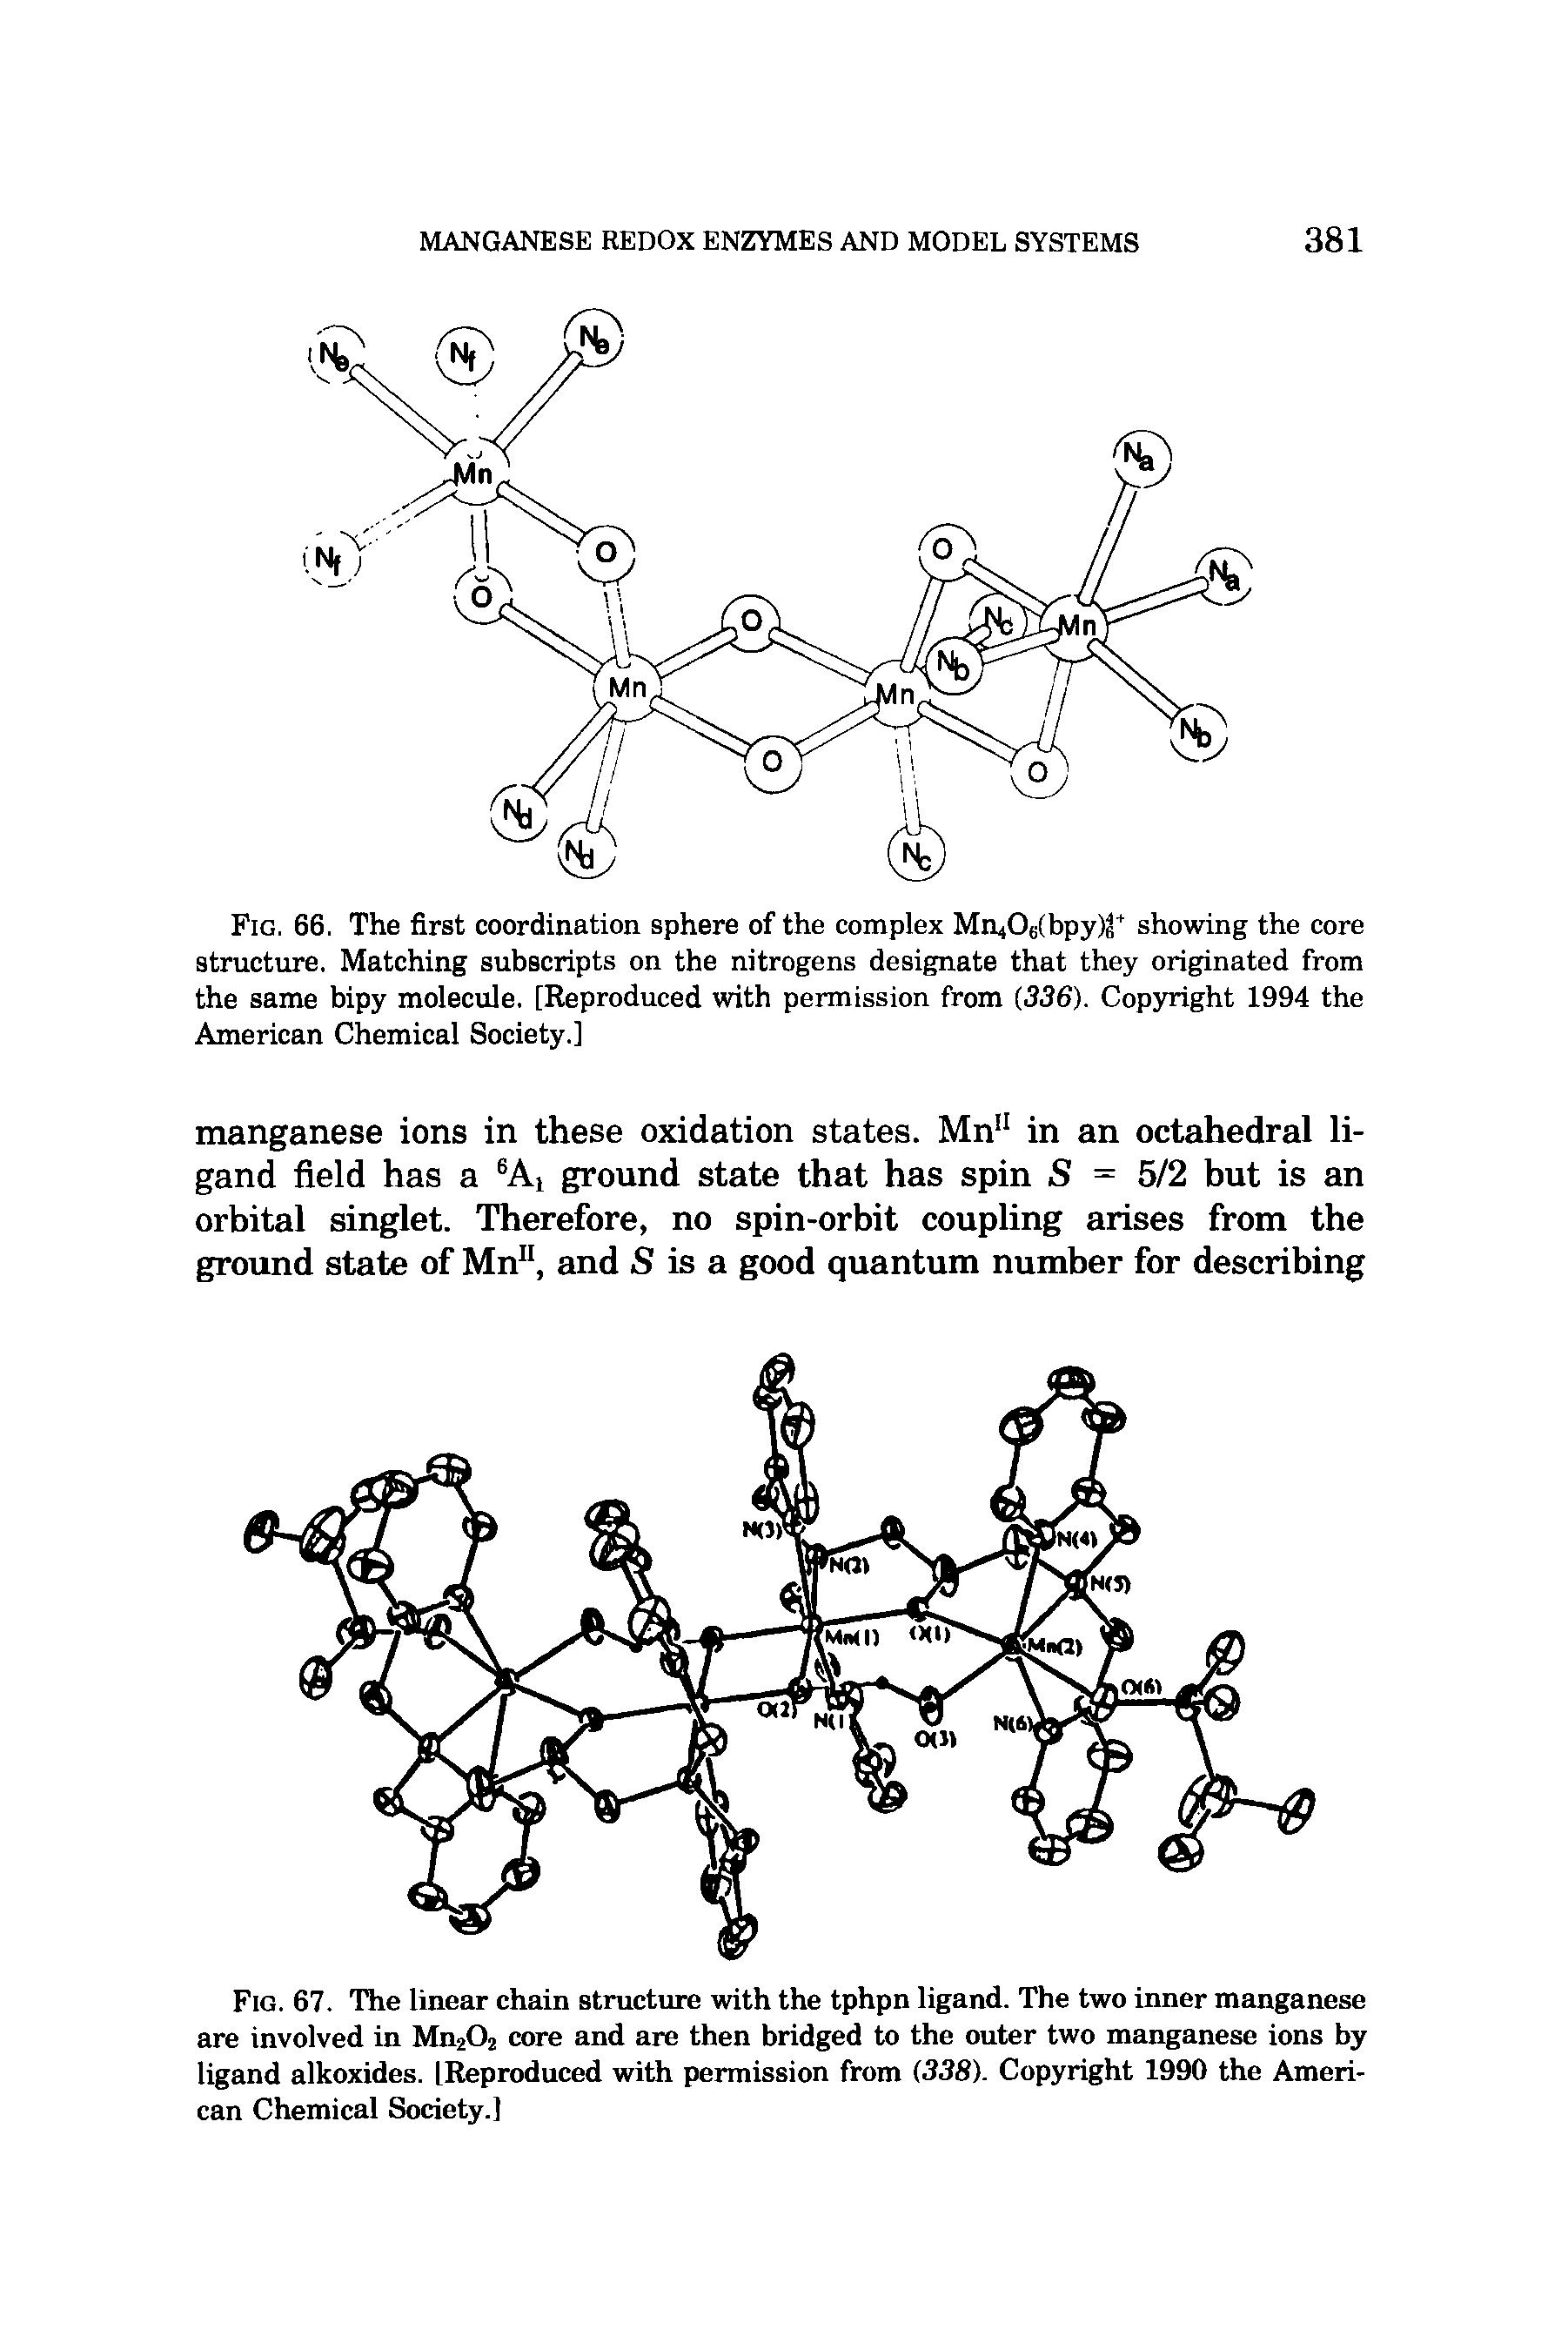 Fig. 67. The linear chain structure with the tphpn ligand. The two inner manganese are involved in Mn202 core and are then bridged to the outer two manganese ions by ligand alkoxides. [Reproduced with permission from (338). Copyright 1990 the American Chemical Society.]...